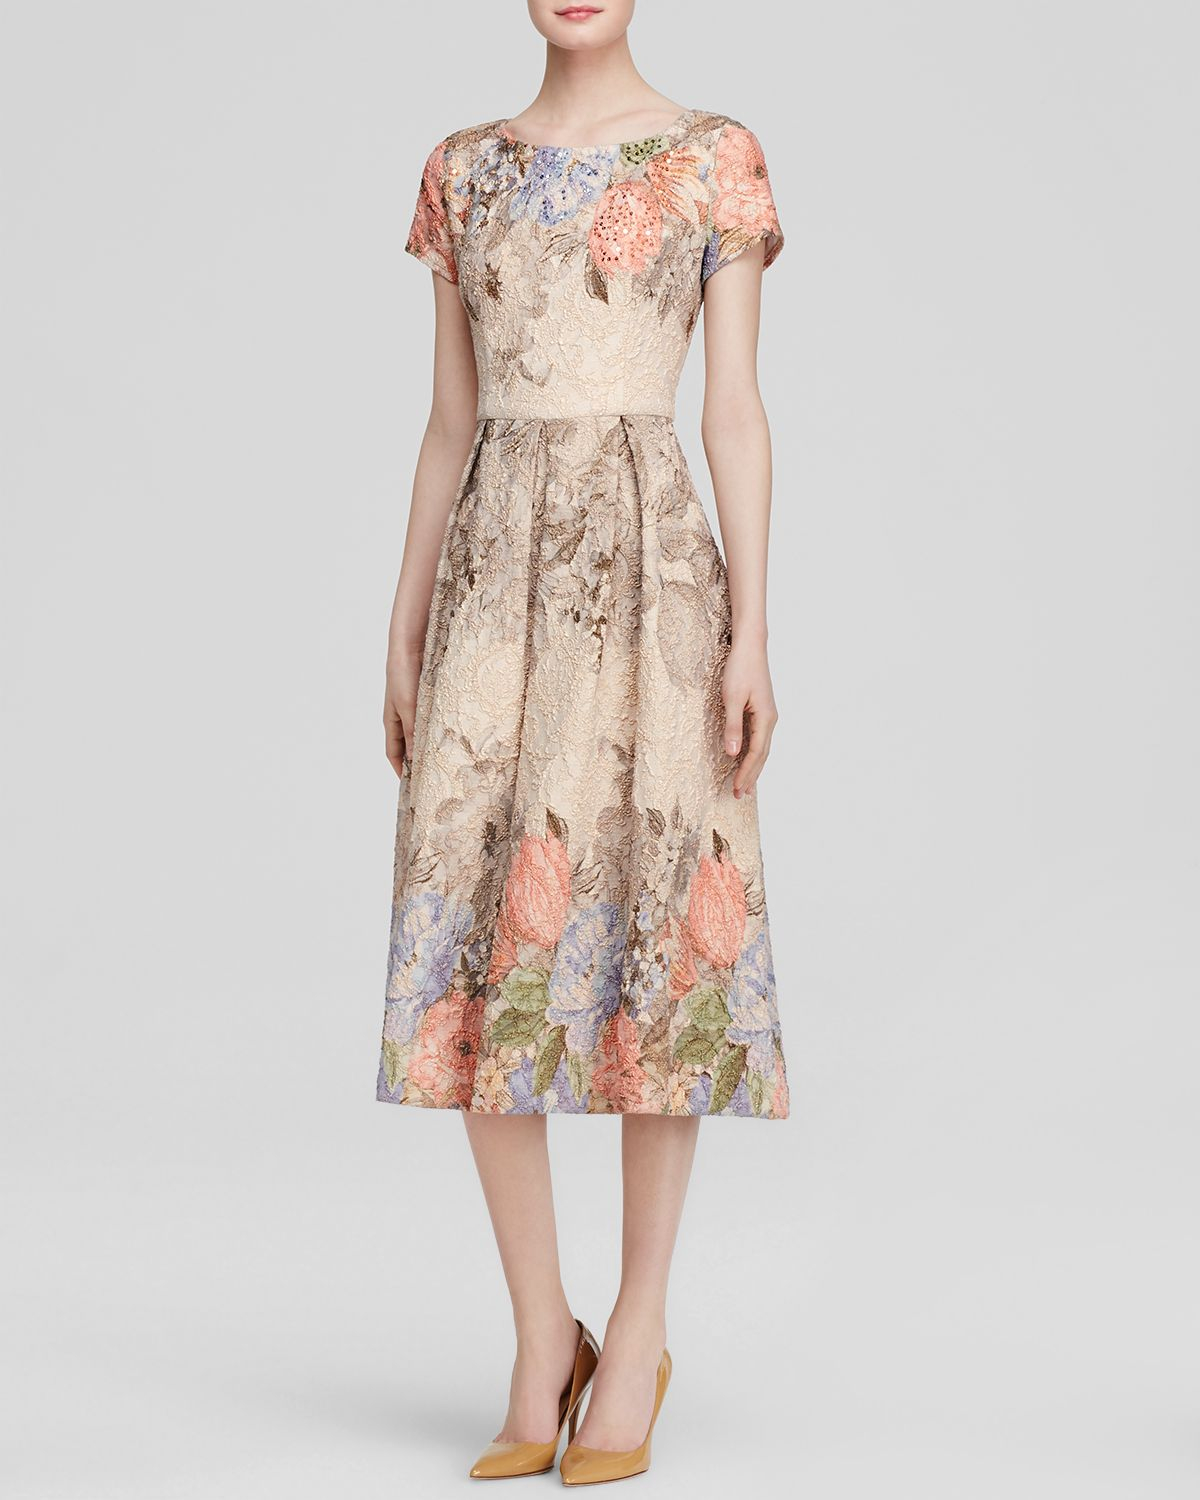 Lyst - Adrianna Papell Dress - Short Sleeve Floral Tea-Length in Pink